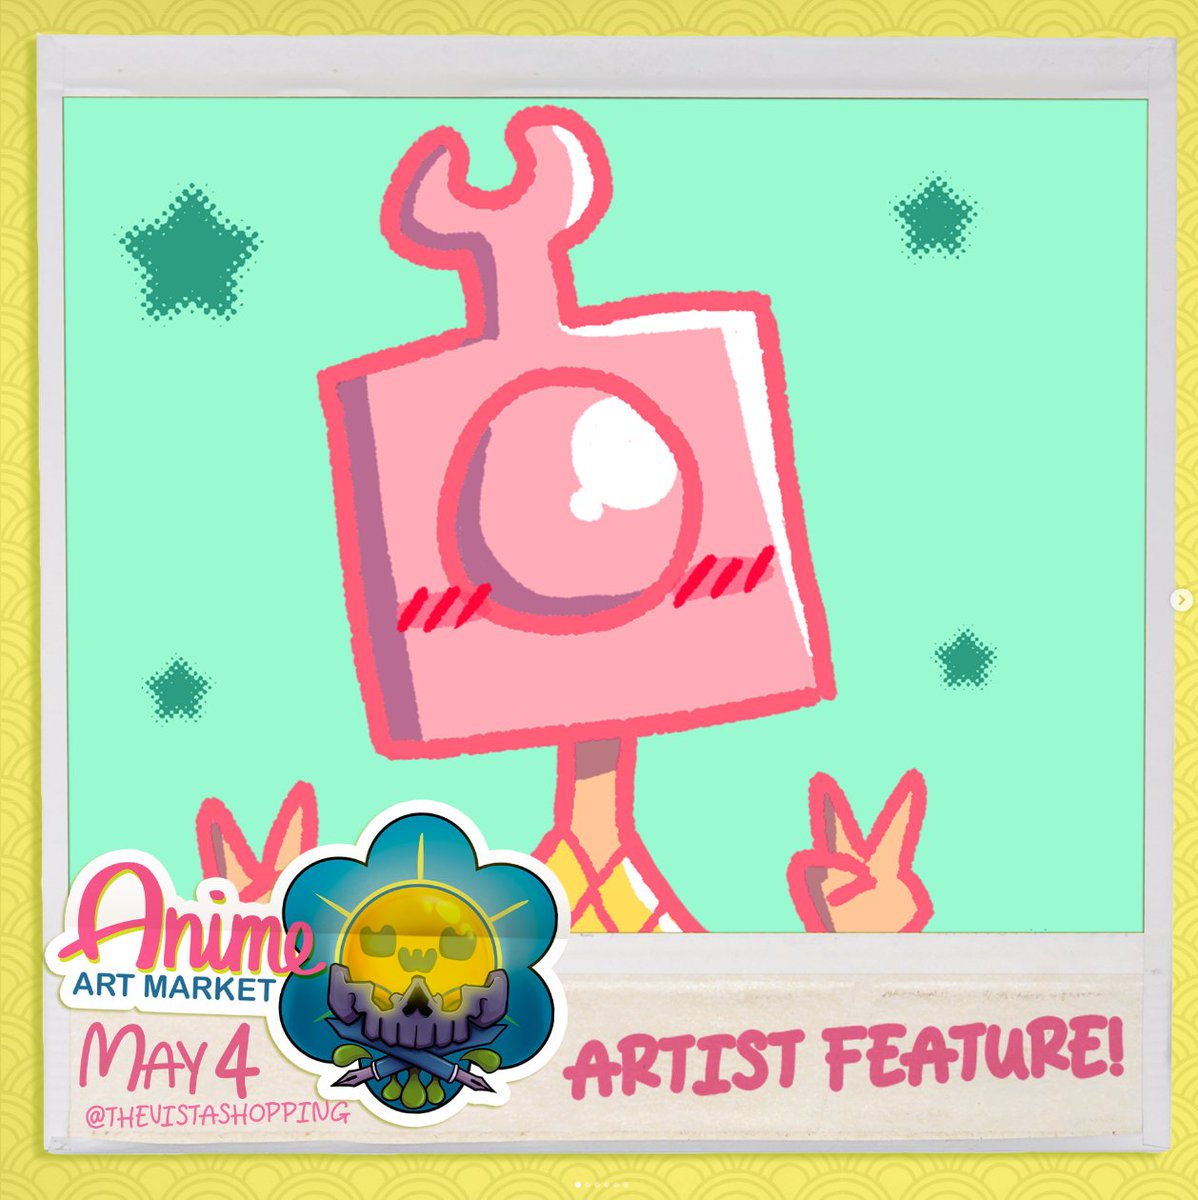 A reminder that I'll be at Anime UwU's Spring Art Market this Saturday, 5/4, at the Vista Shopping Center in Lewisville! It's a free-to-attend event and I'll have some new stuff including some early Pre-Order items~! Hope to see you all there!